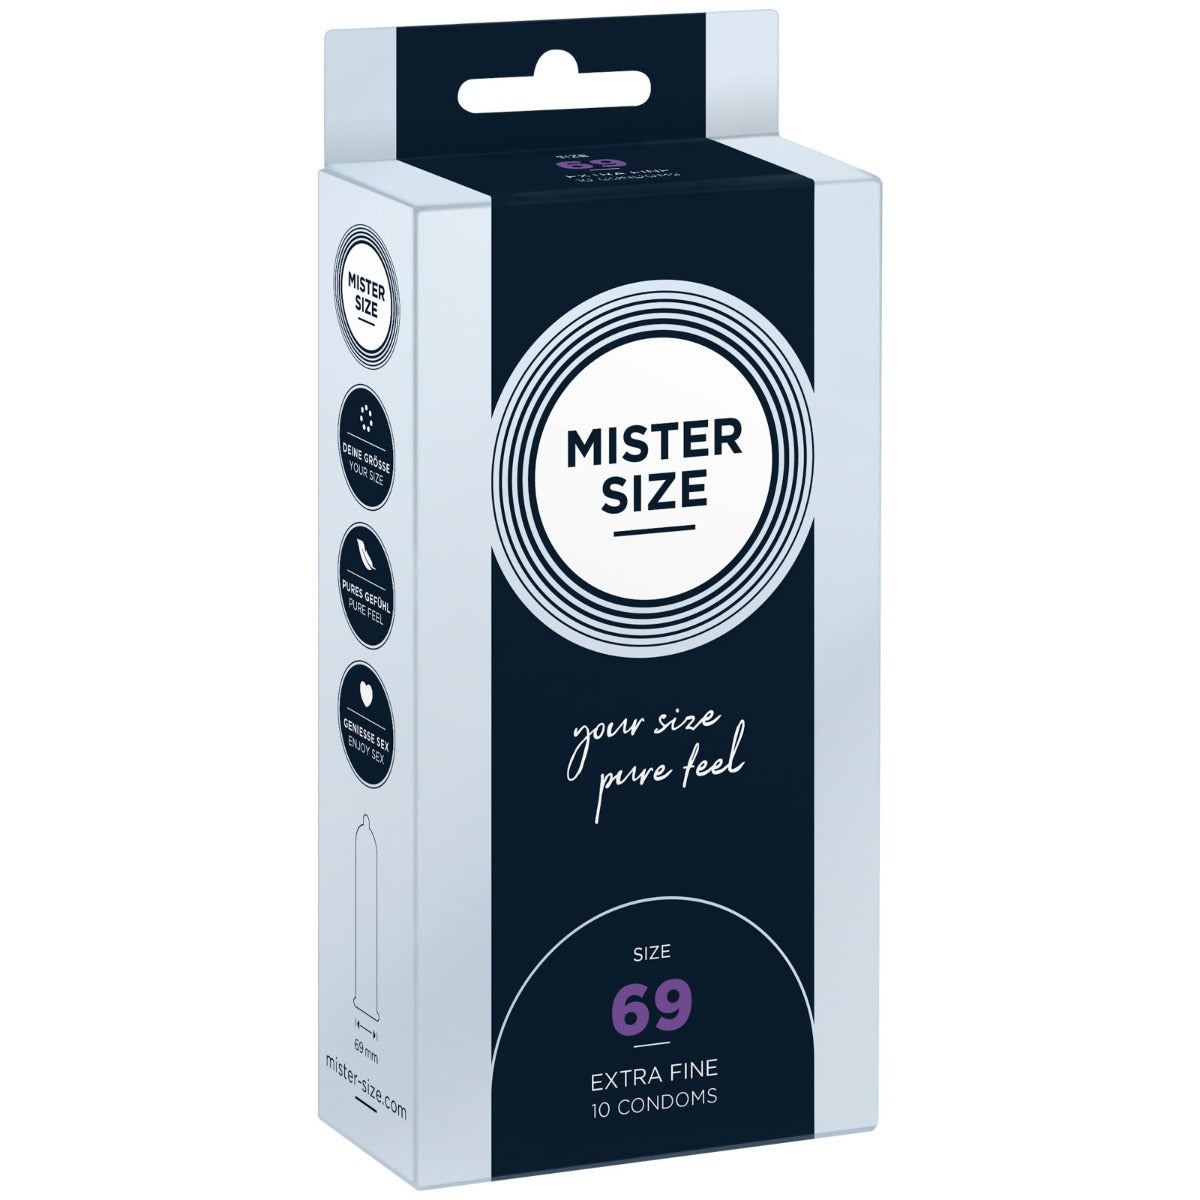 Mister Size Pure Feel Condoms 69mm (8085944893679)